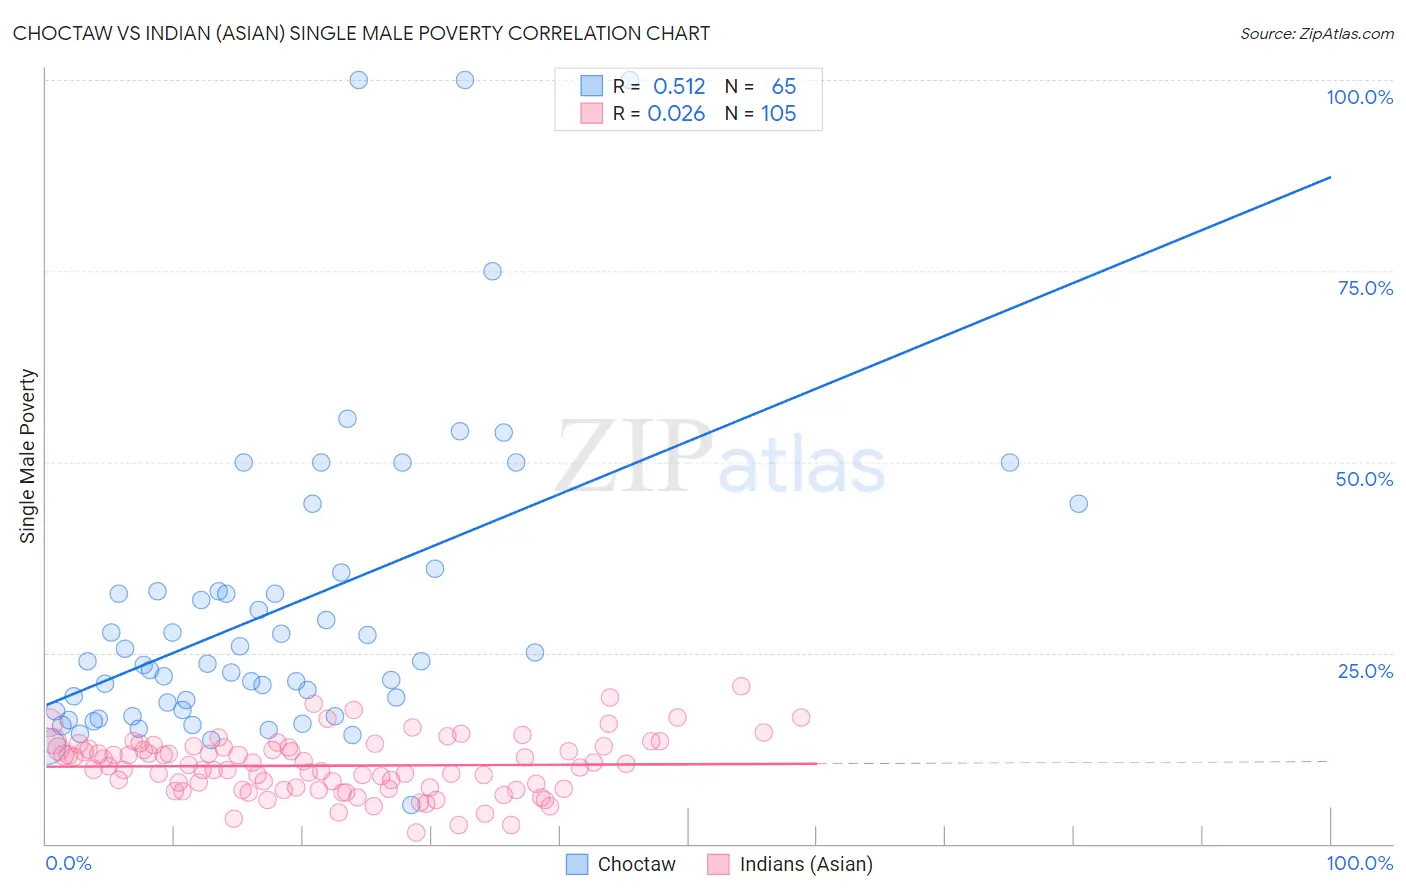 Choctaw vs Indian (Asian) Single Male Poverty